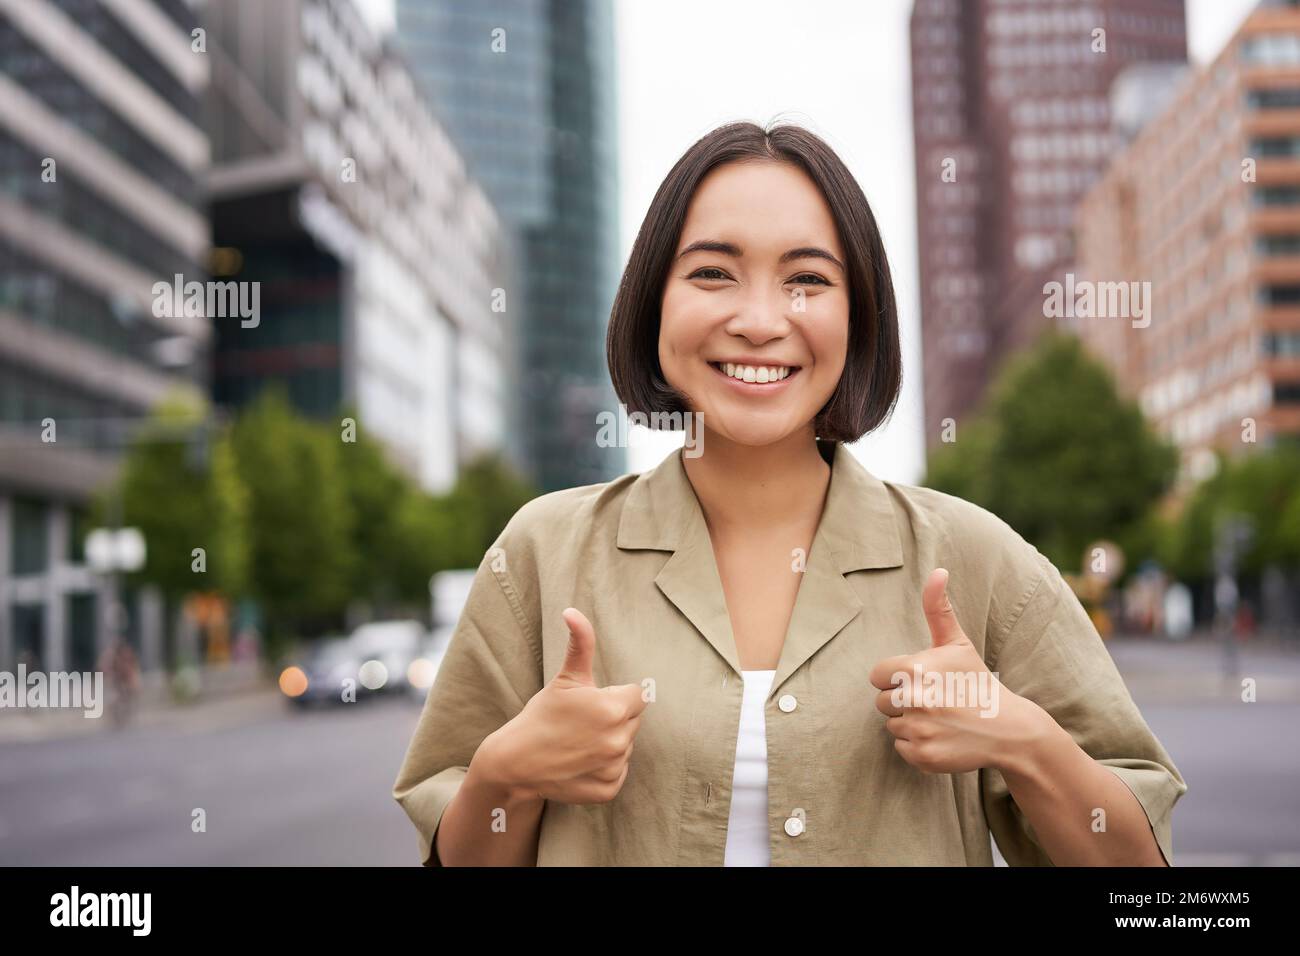 Enthusiastic asian woman , shows thumbs up in approval, looking upbeat, say yes, approves and agrees, stands on street Stock Photo